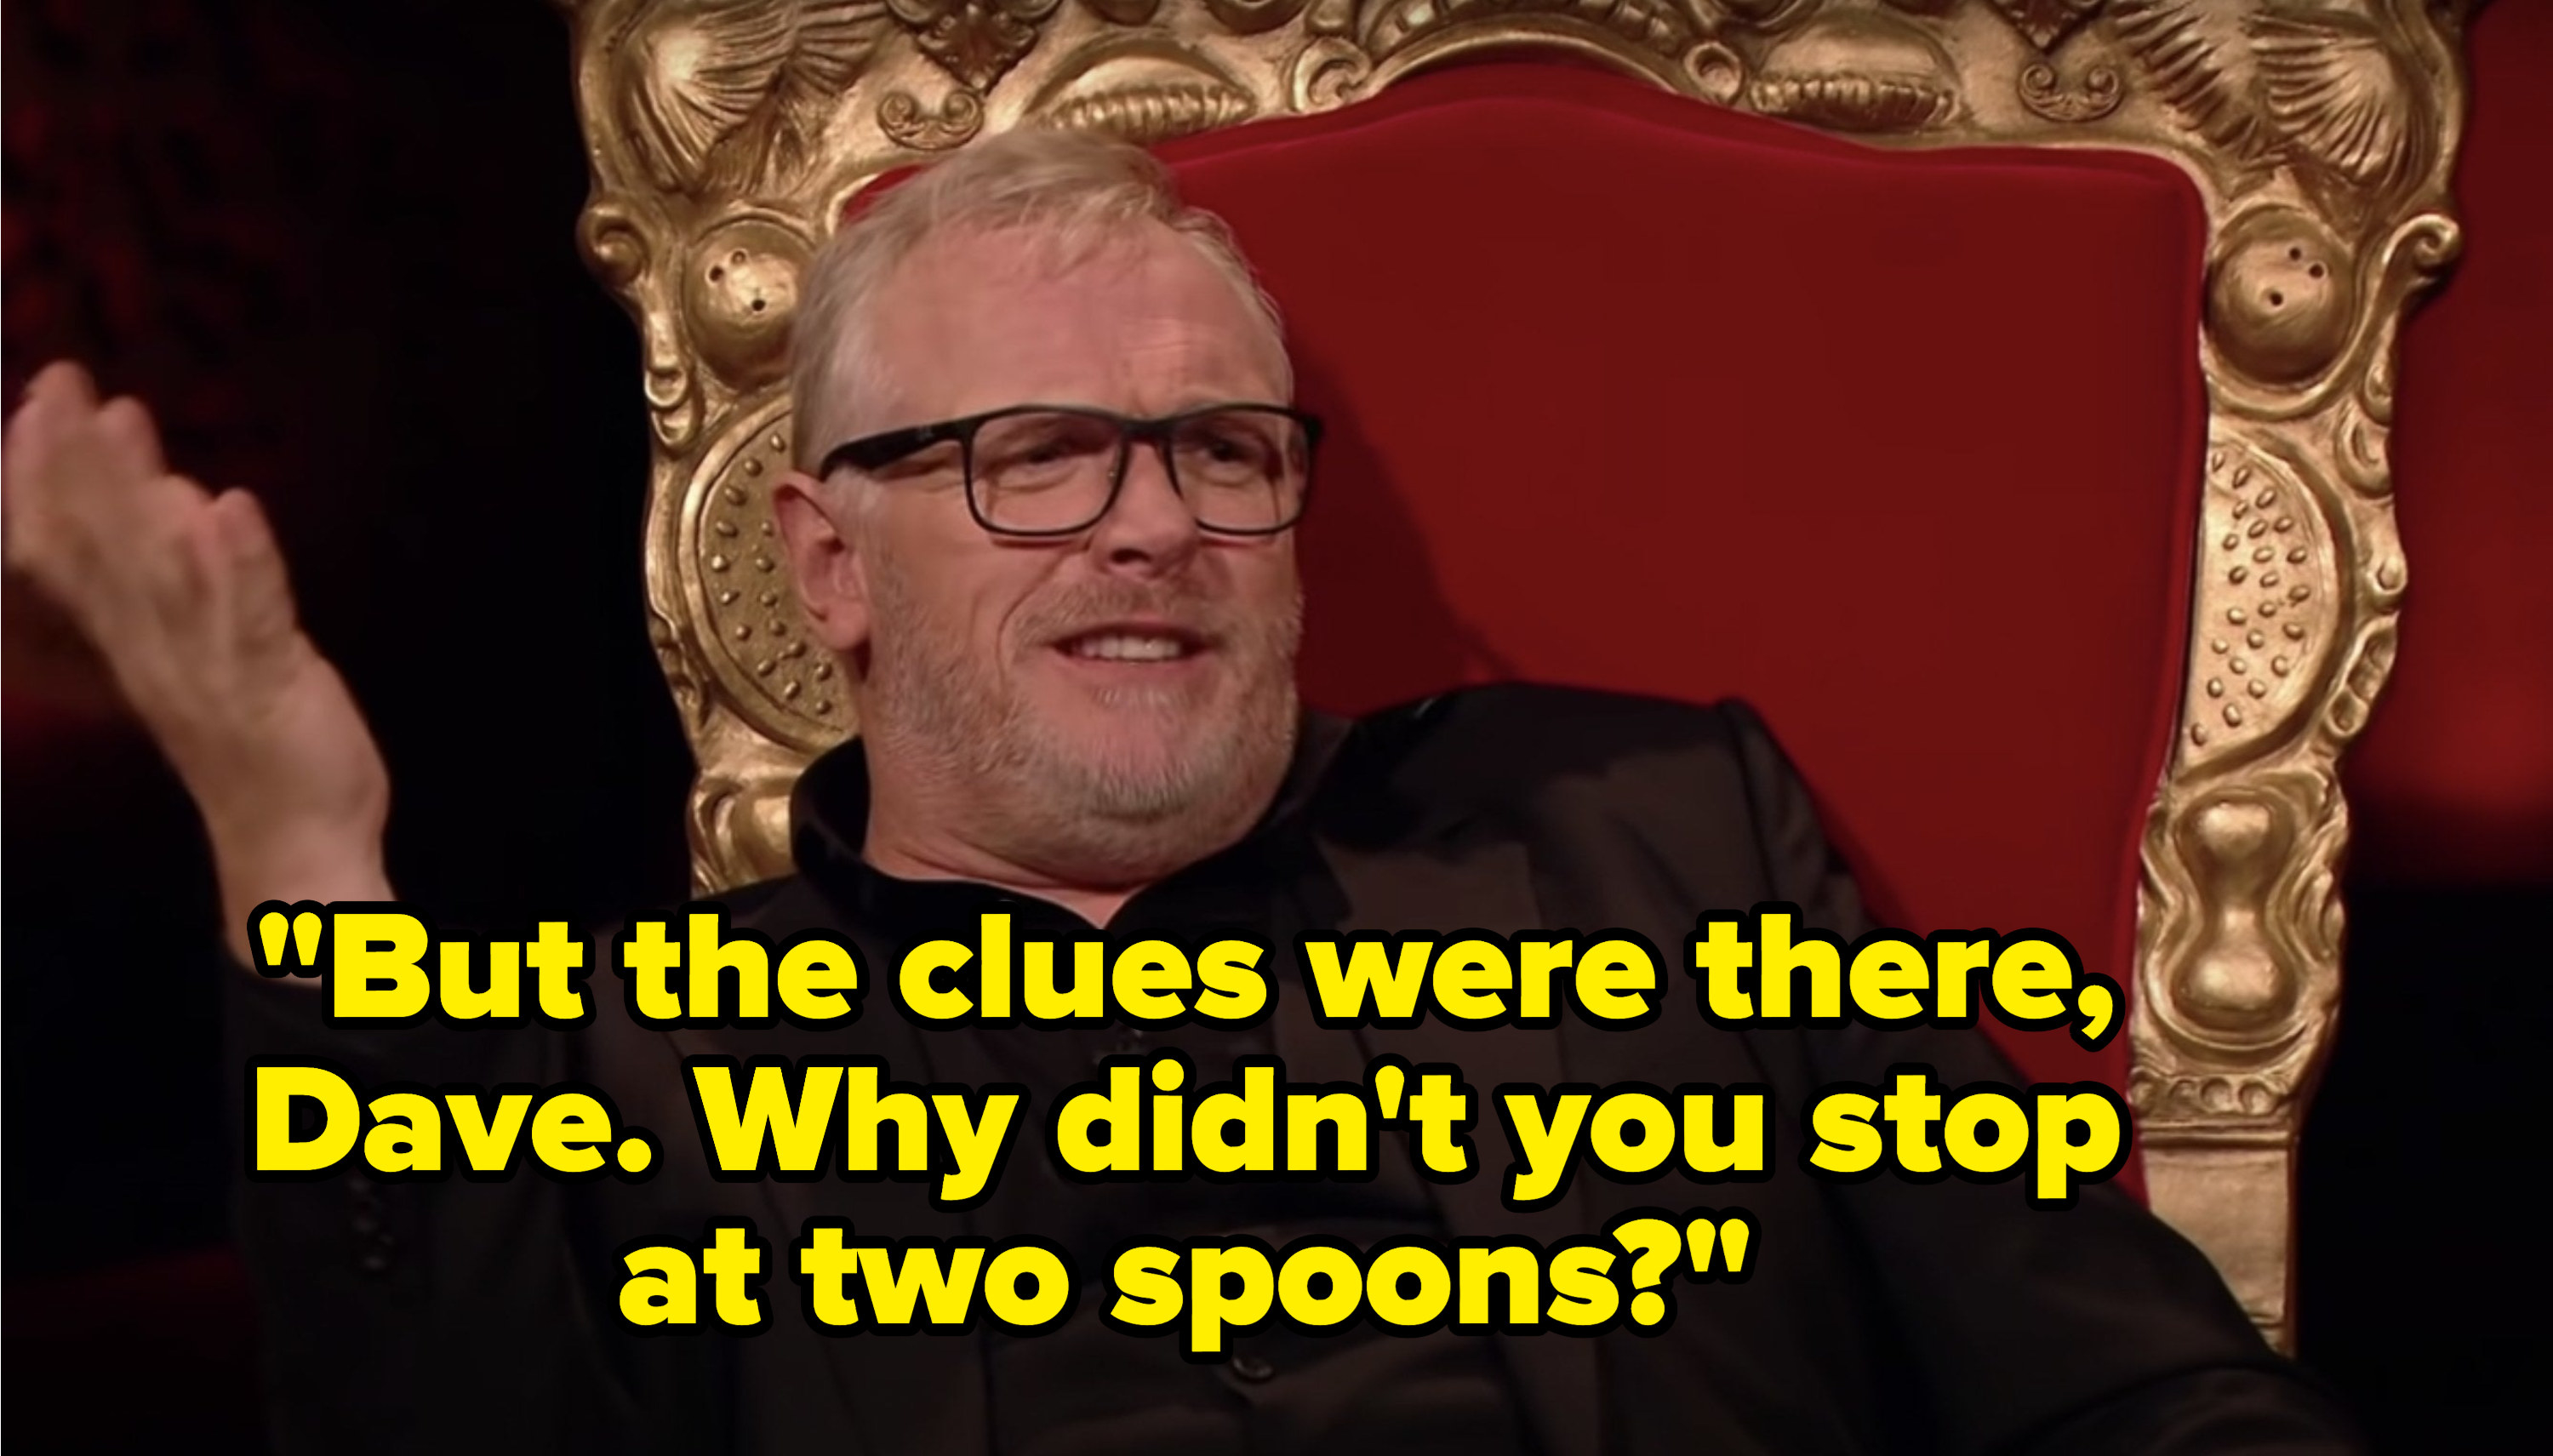 Greg Davies says, But the clues were there, Dave, why didnt you stop at two spoons